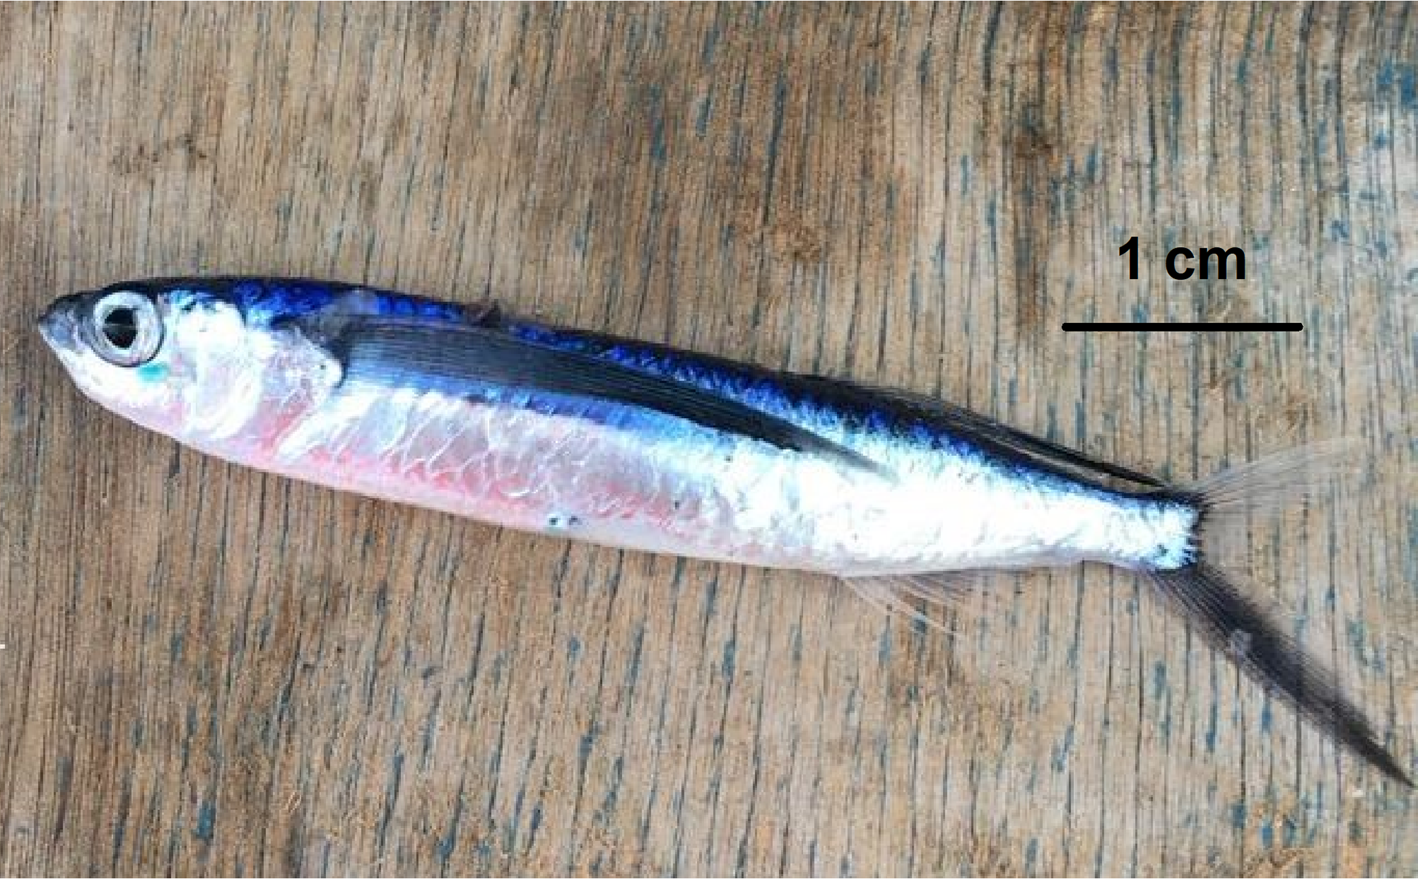 First record of the Lessepsian fish Parexocoetus mento in Italian waters  and GIS-based spatial and temporal distribution in Mediterranean Sea, Journal of the Marine Biological Association of the United Kingdom